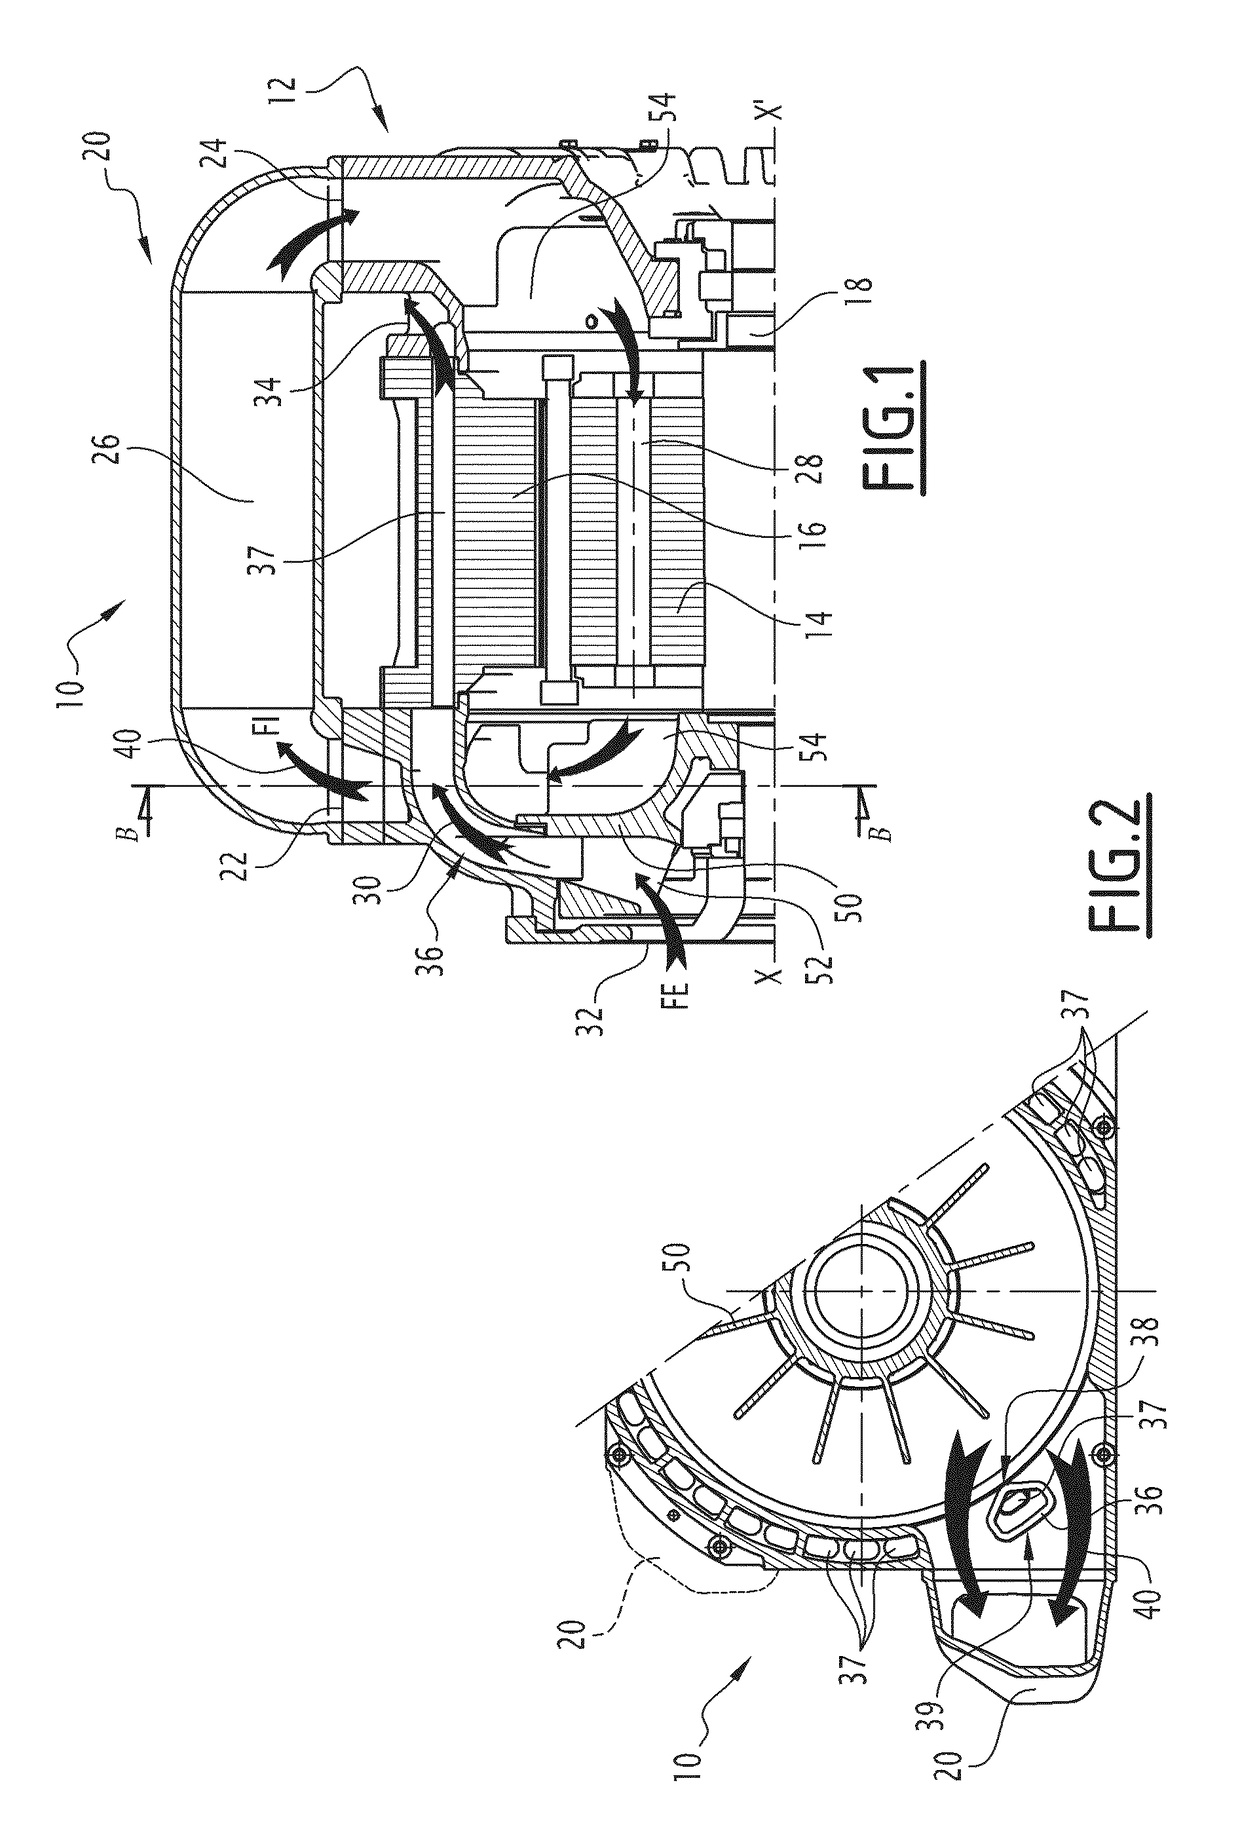 Electric motor with outer radiator and two separate cooling circuits